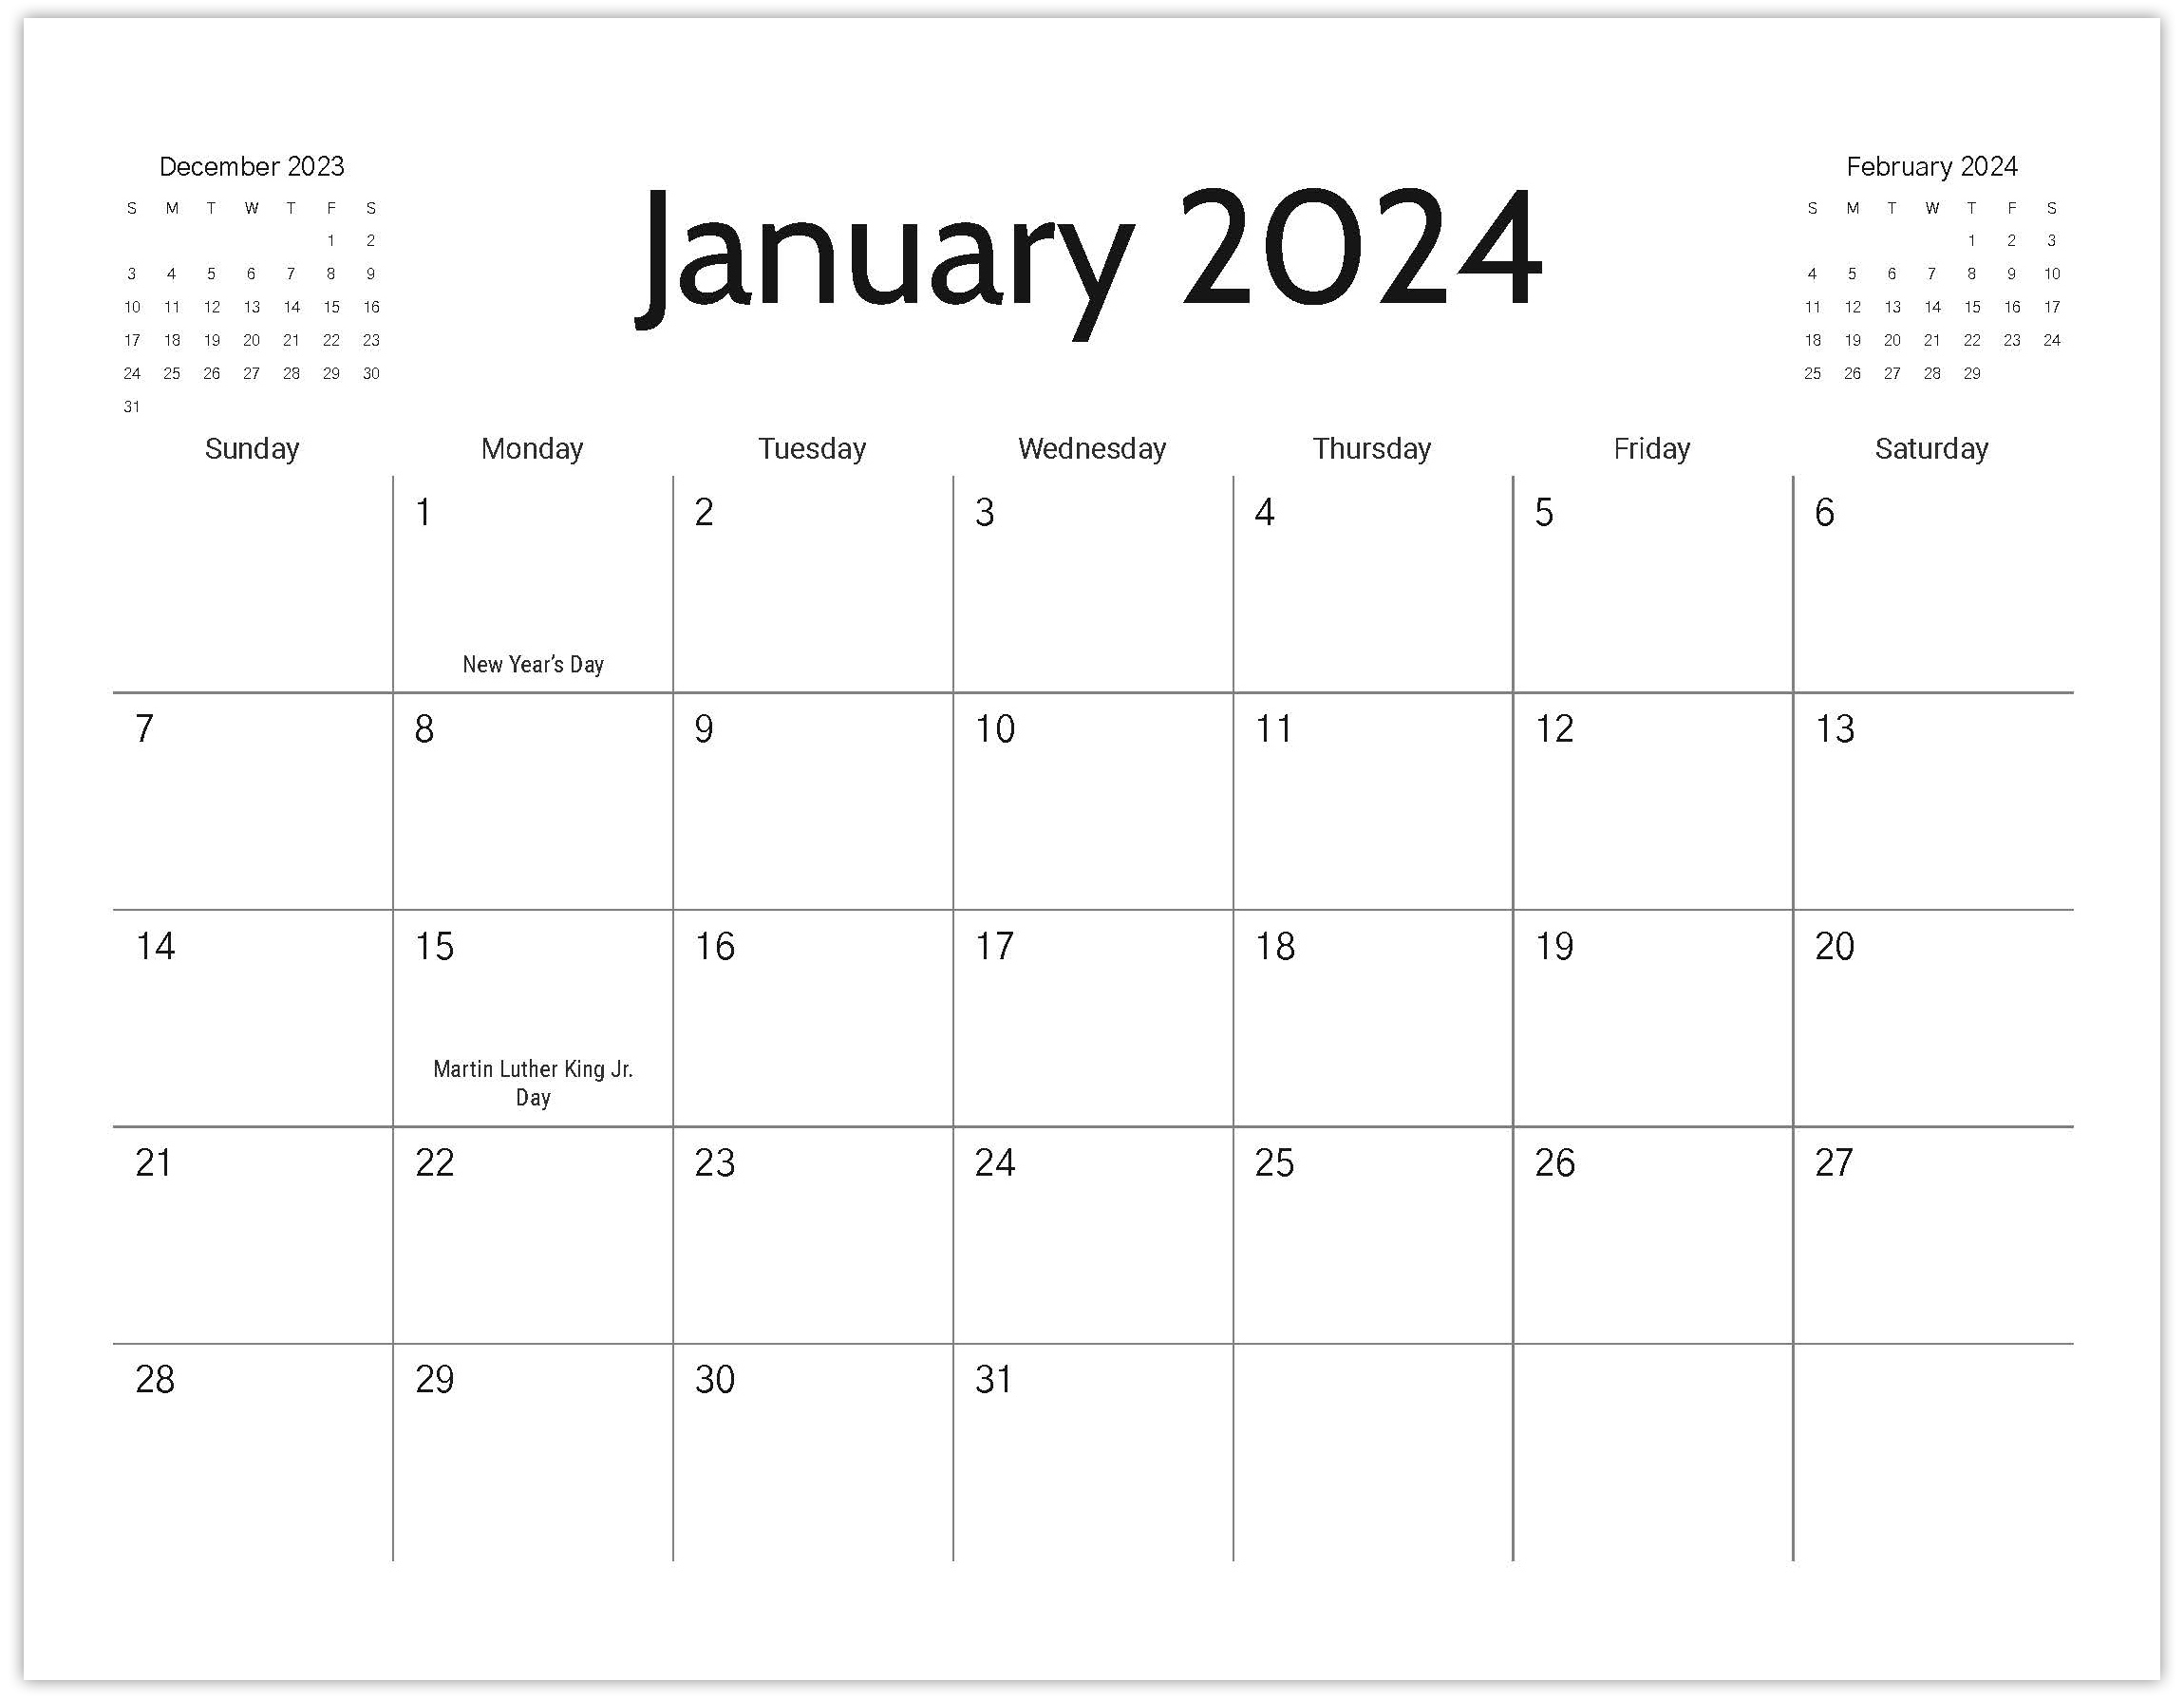 Free Printable Calendar 2024 | Printable Monthly Calendar 2024 With Notes